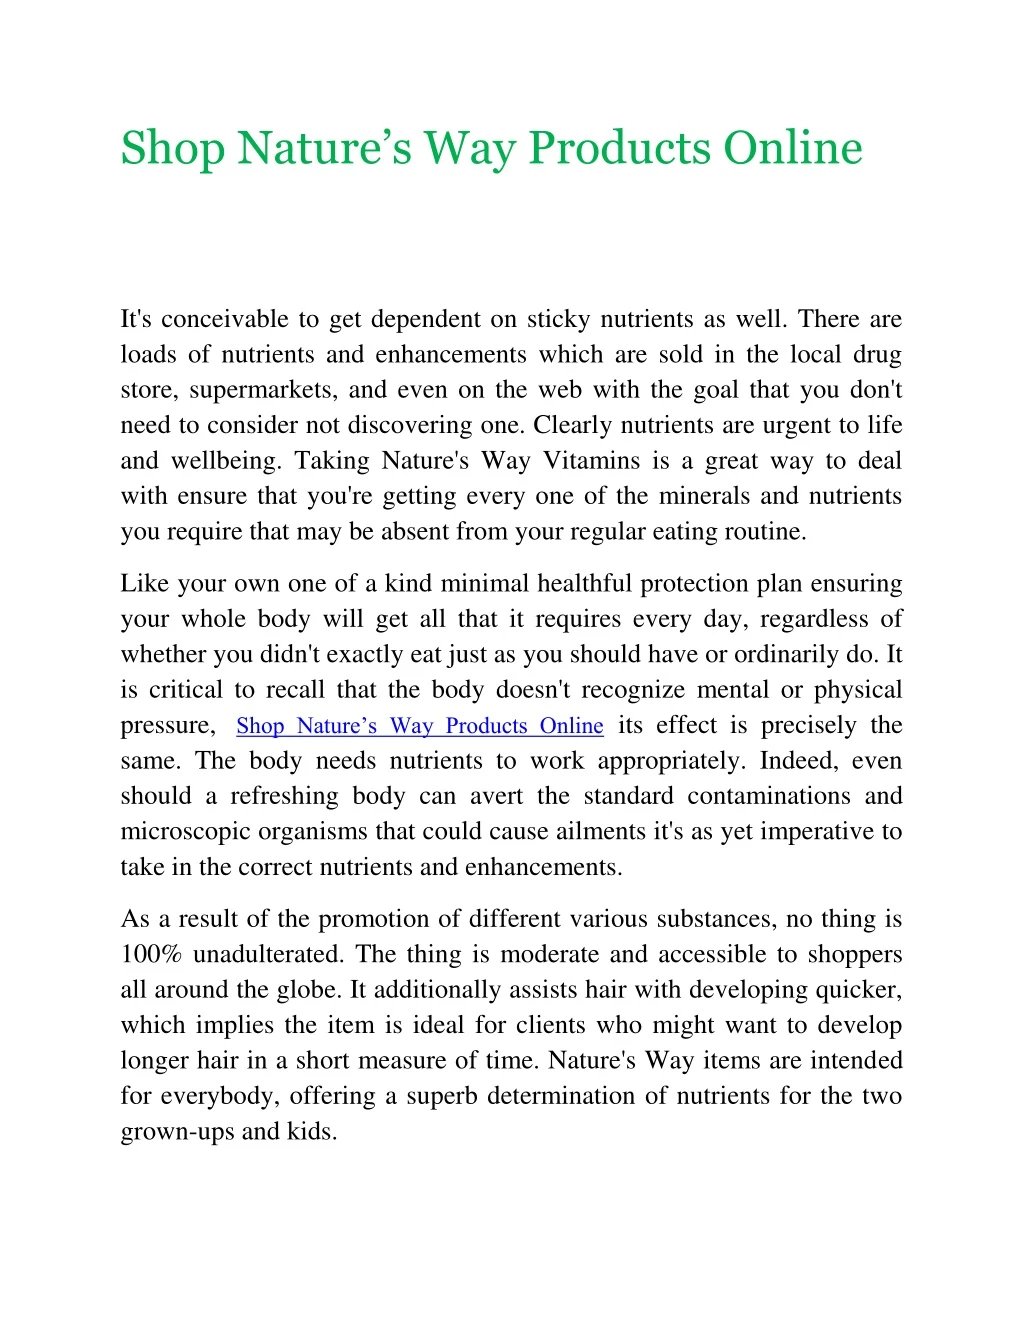 shop nature s way products online